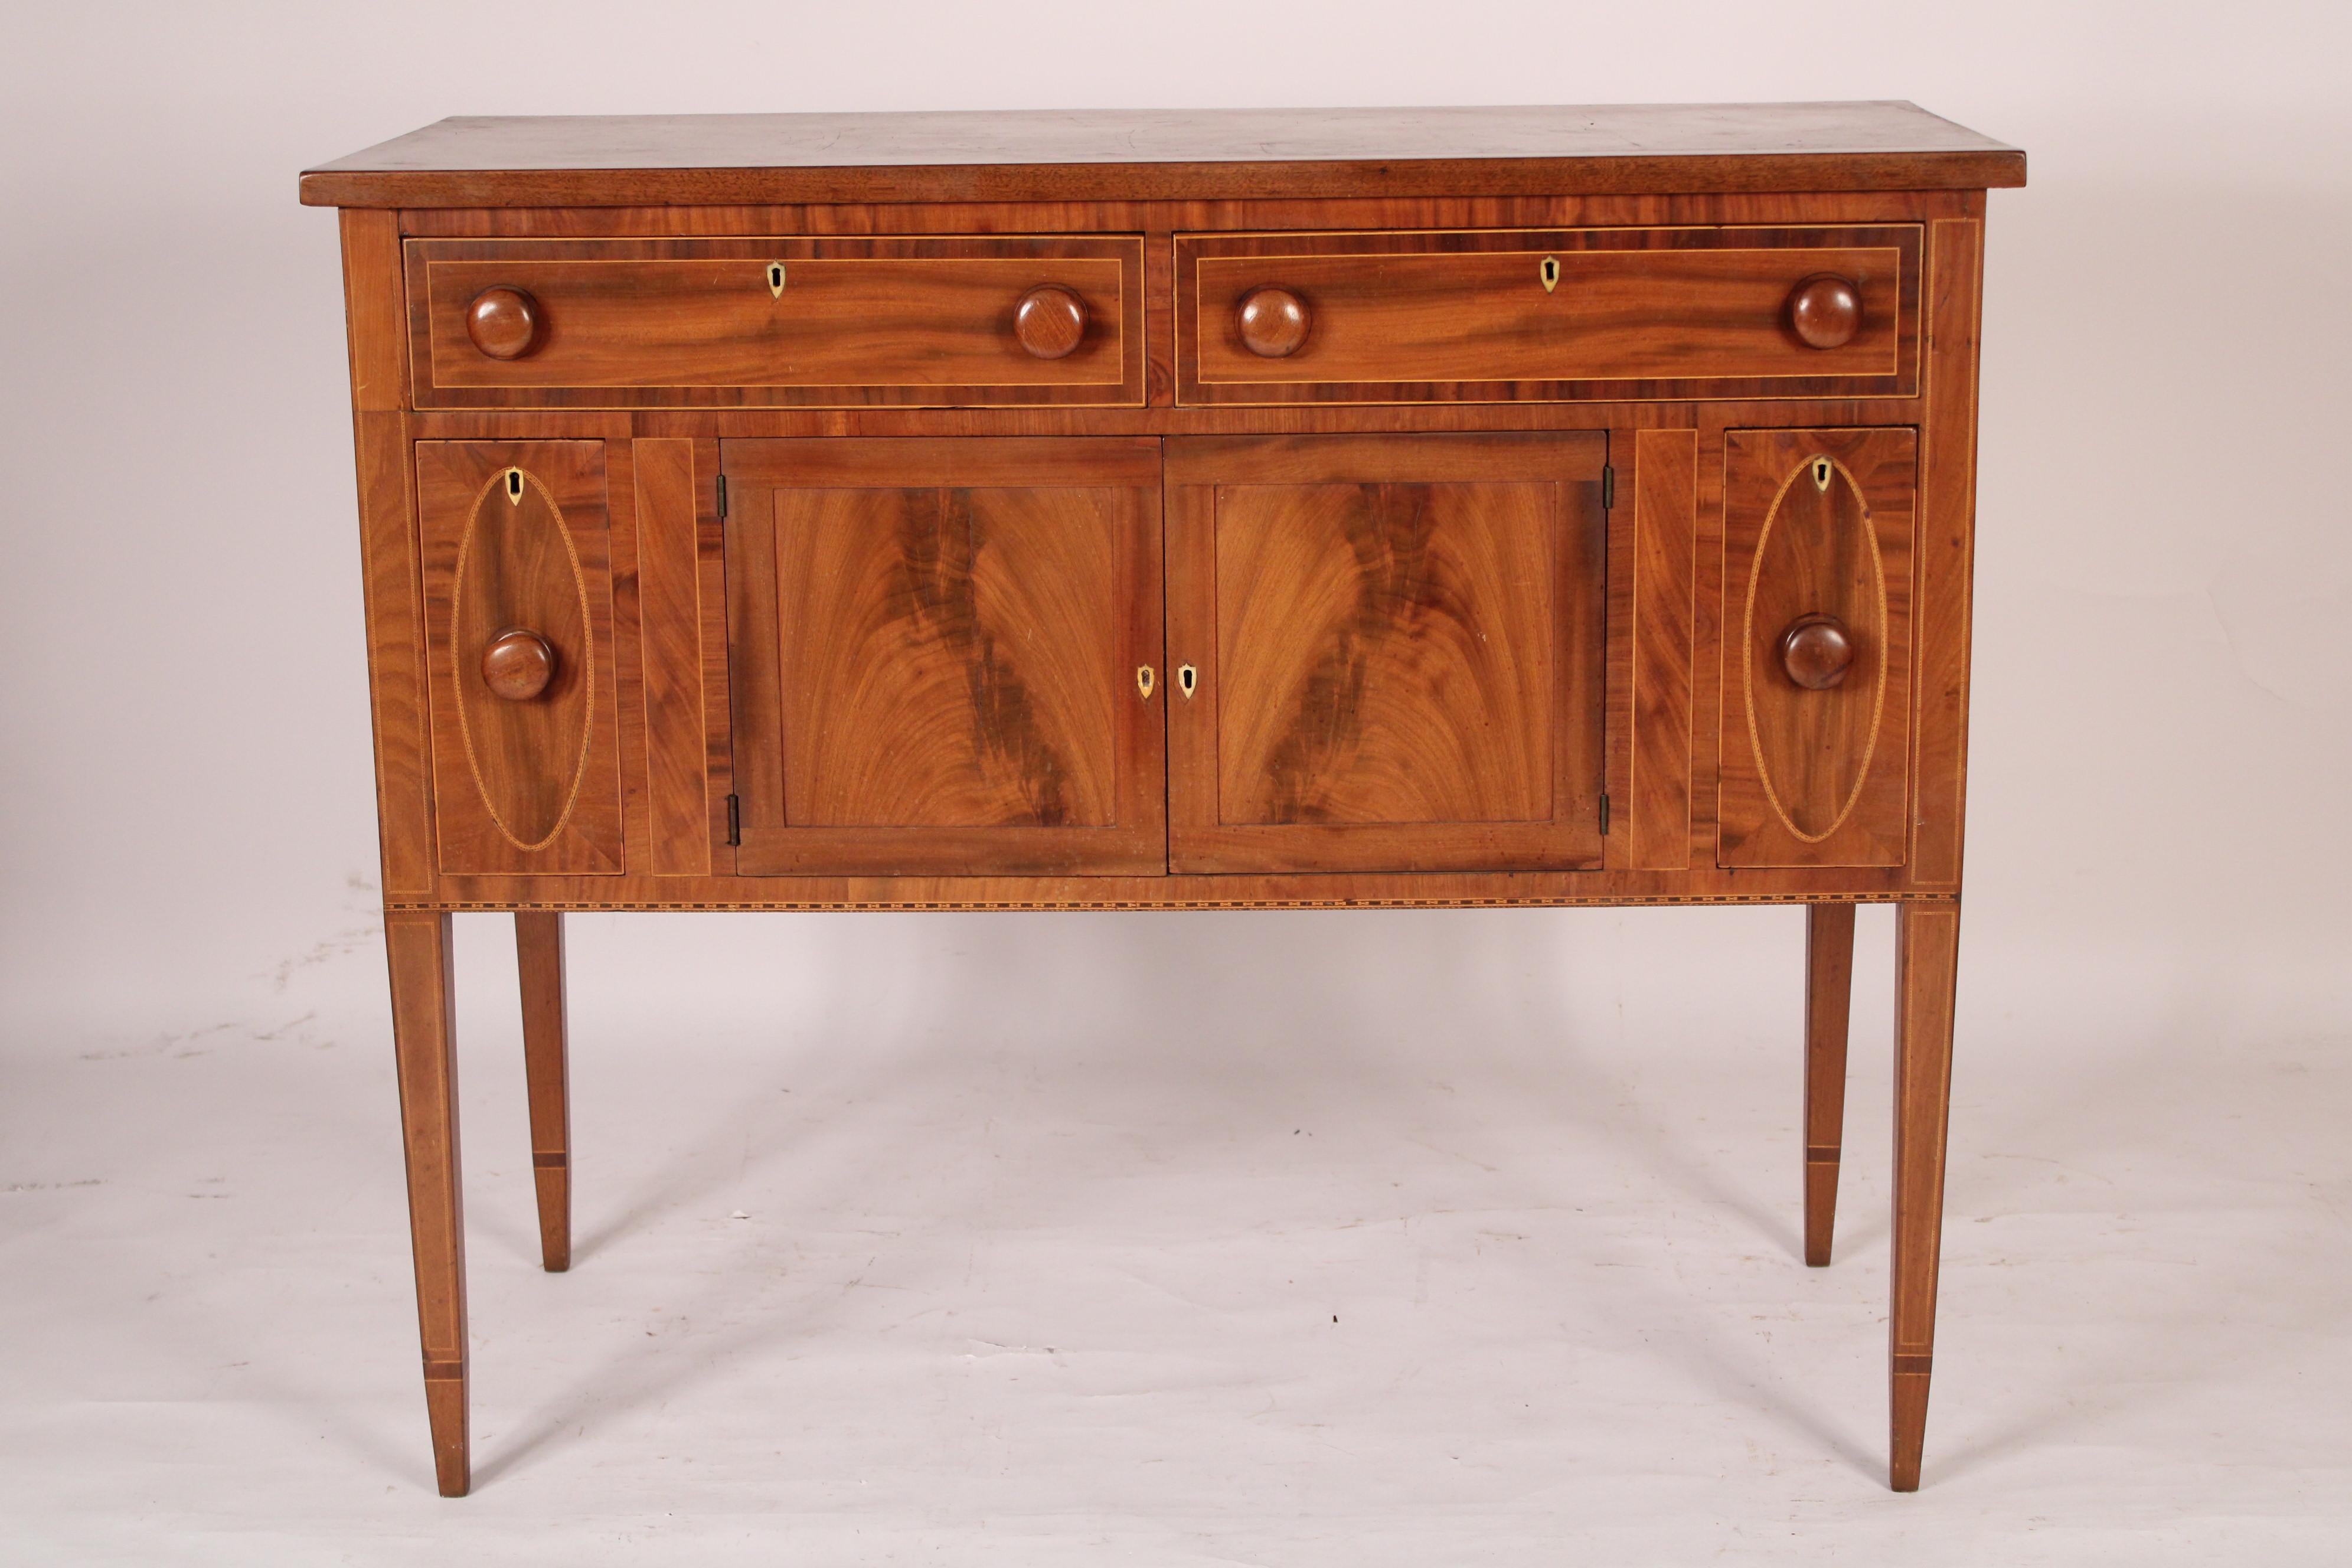 American Federal flame mahogany and elm sideboard, early 19th century. With an overhanging elm top over two mahogany drawers with mahogany crossbanding, wood knobs and bone shield shaped escutcheons, below are two small flame mahogany drawers with